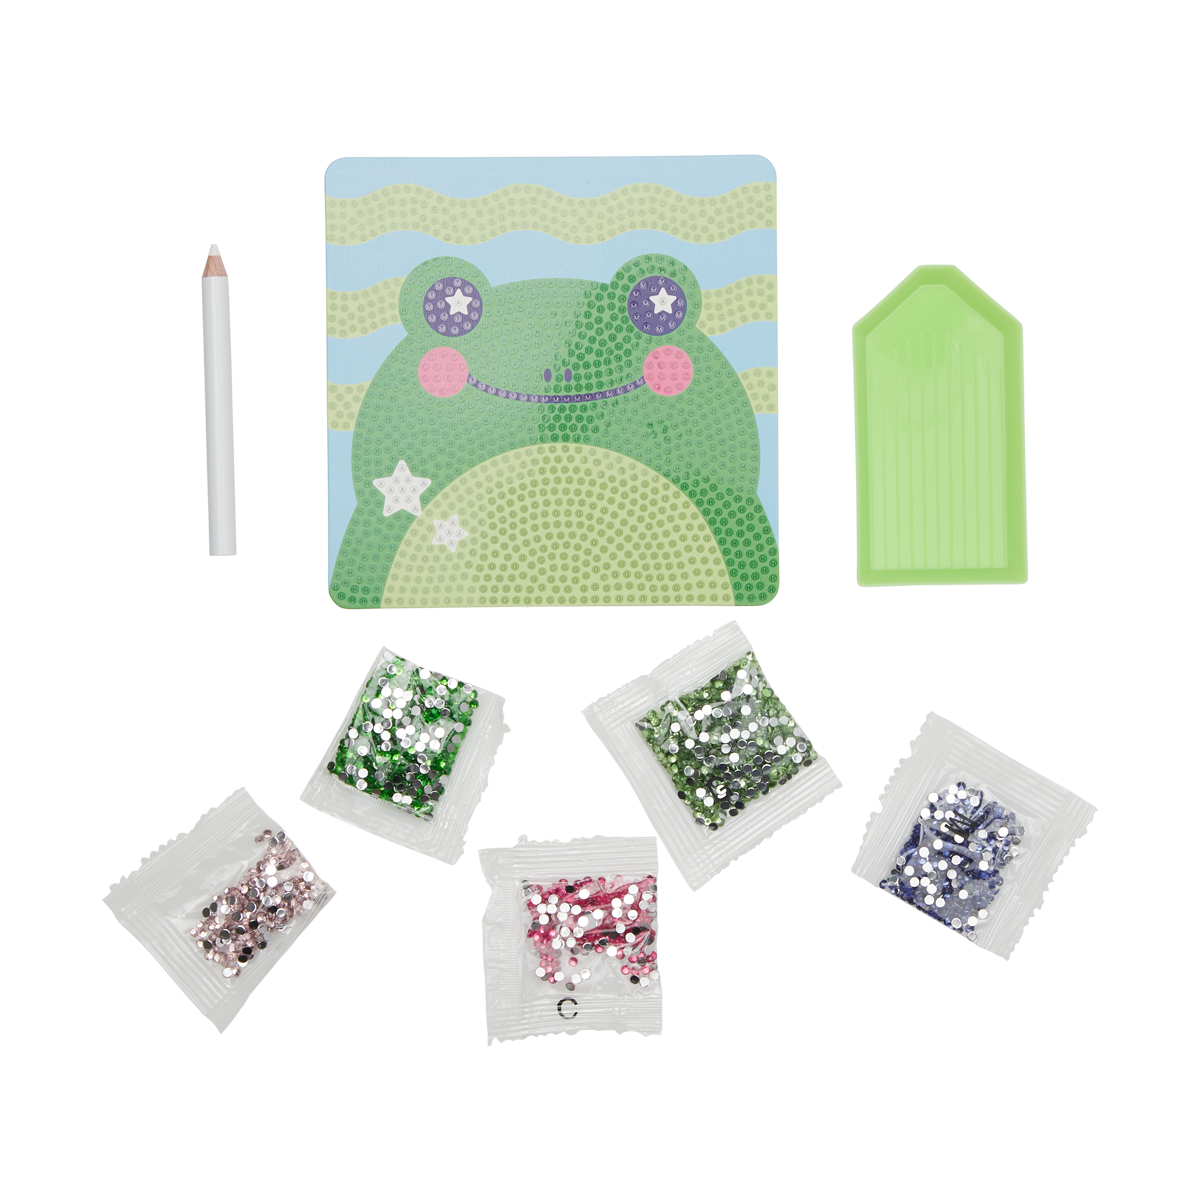 OOLY view of Razzle Dazzle DIY Gem Art Kit - Funny Frog contents